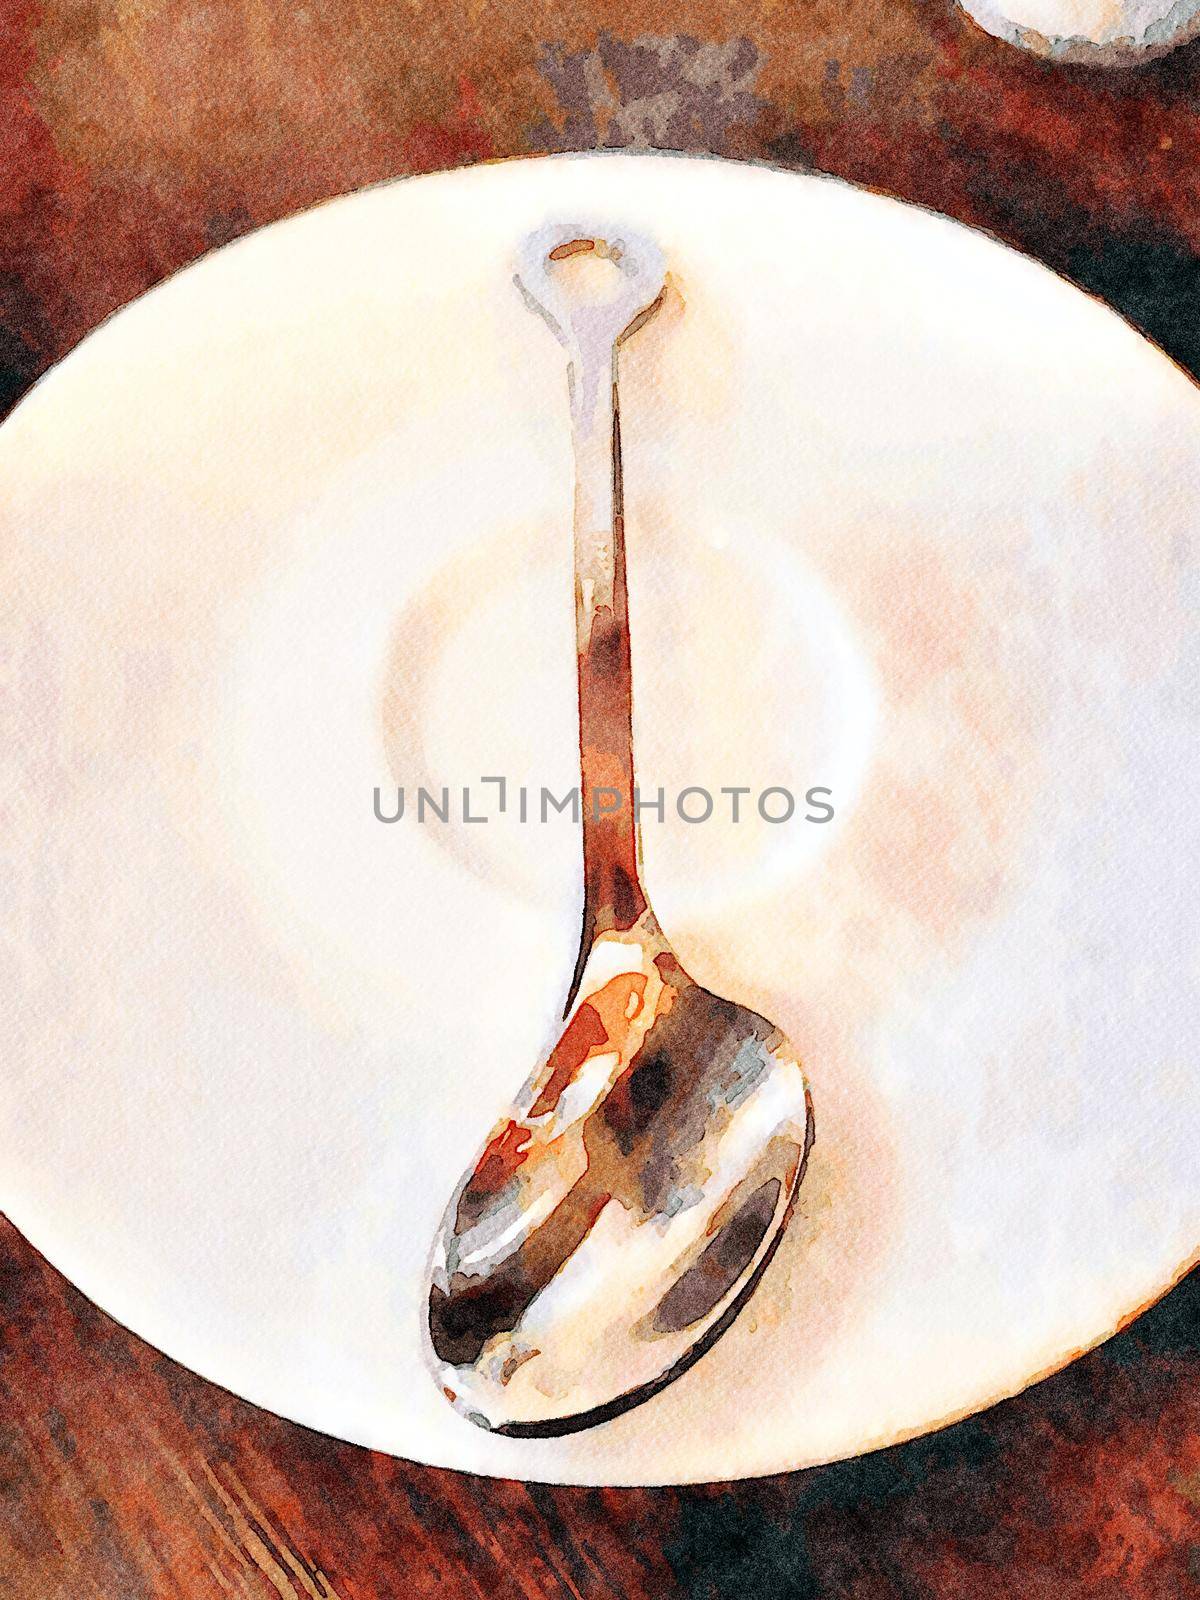 watercolor representing a teaspoon on a saucer one morning in Venice